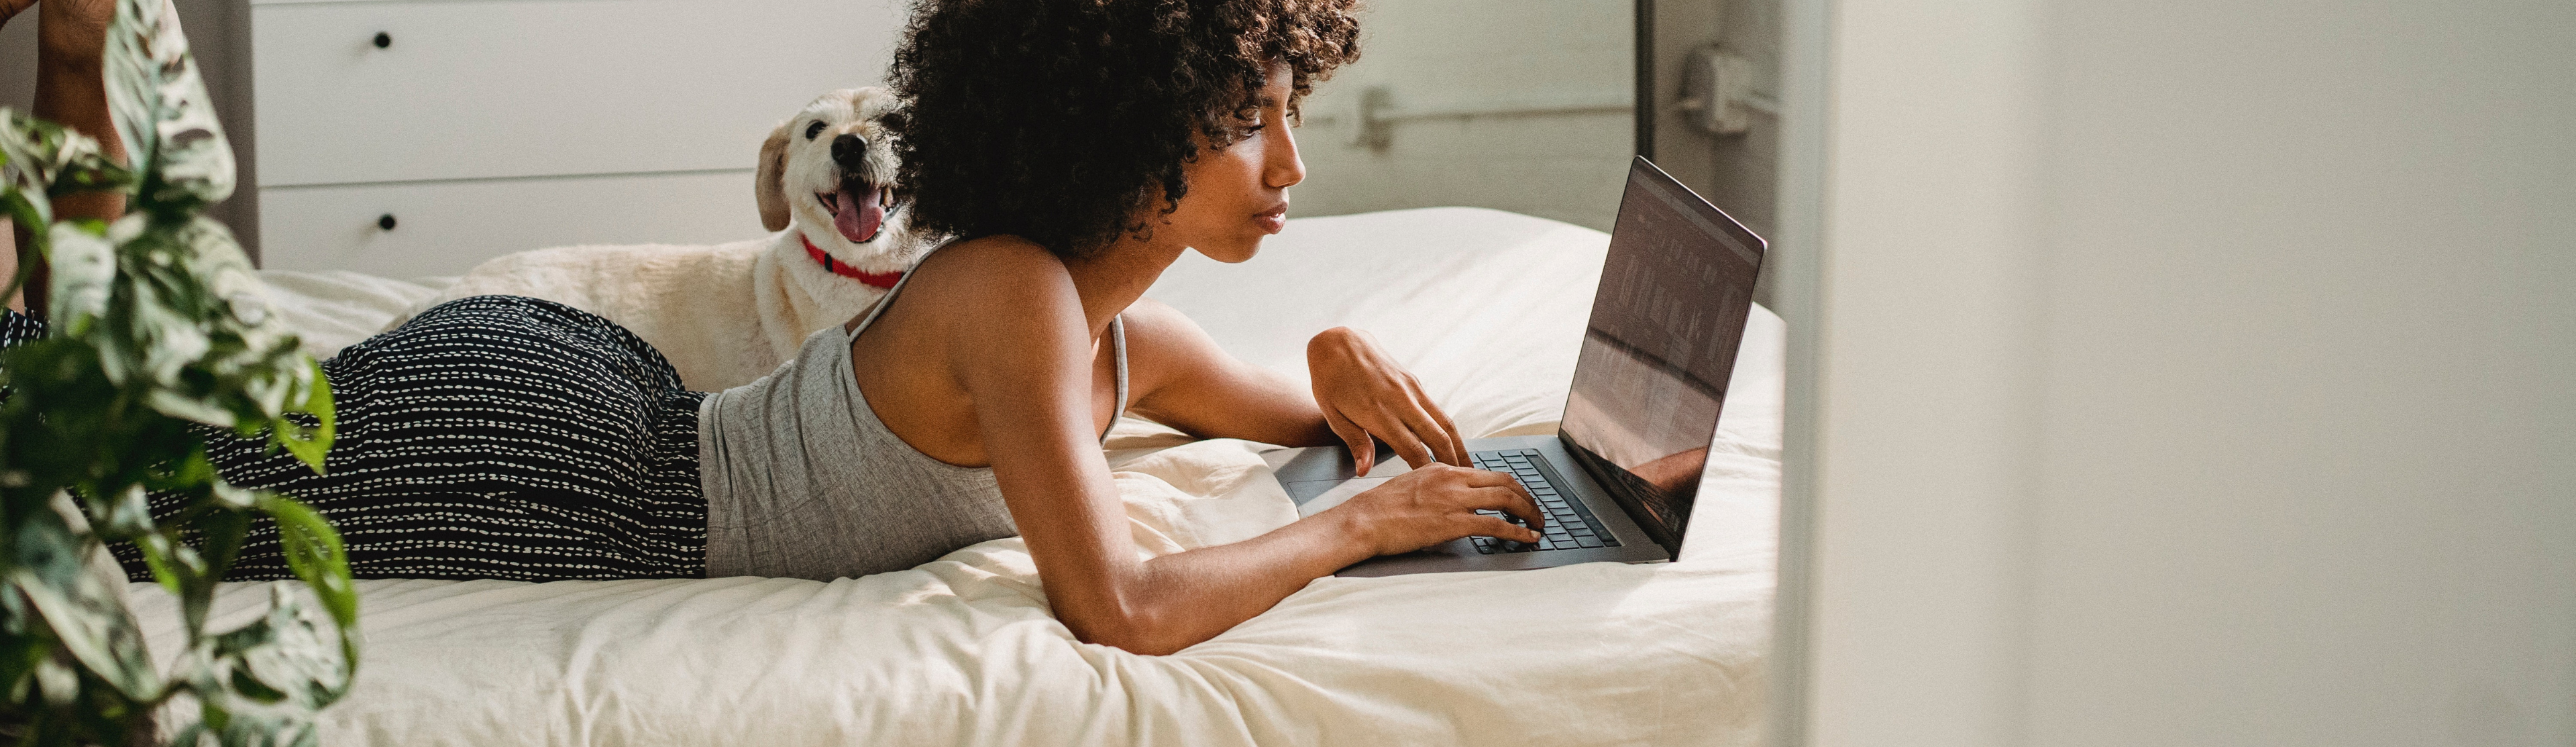 Girl laying on bed looking at laptop